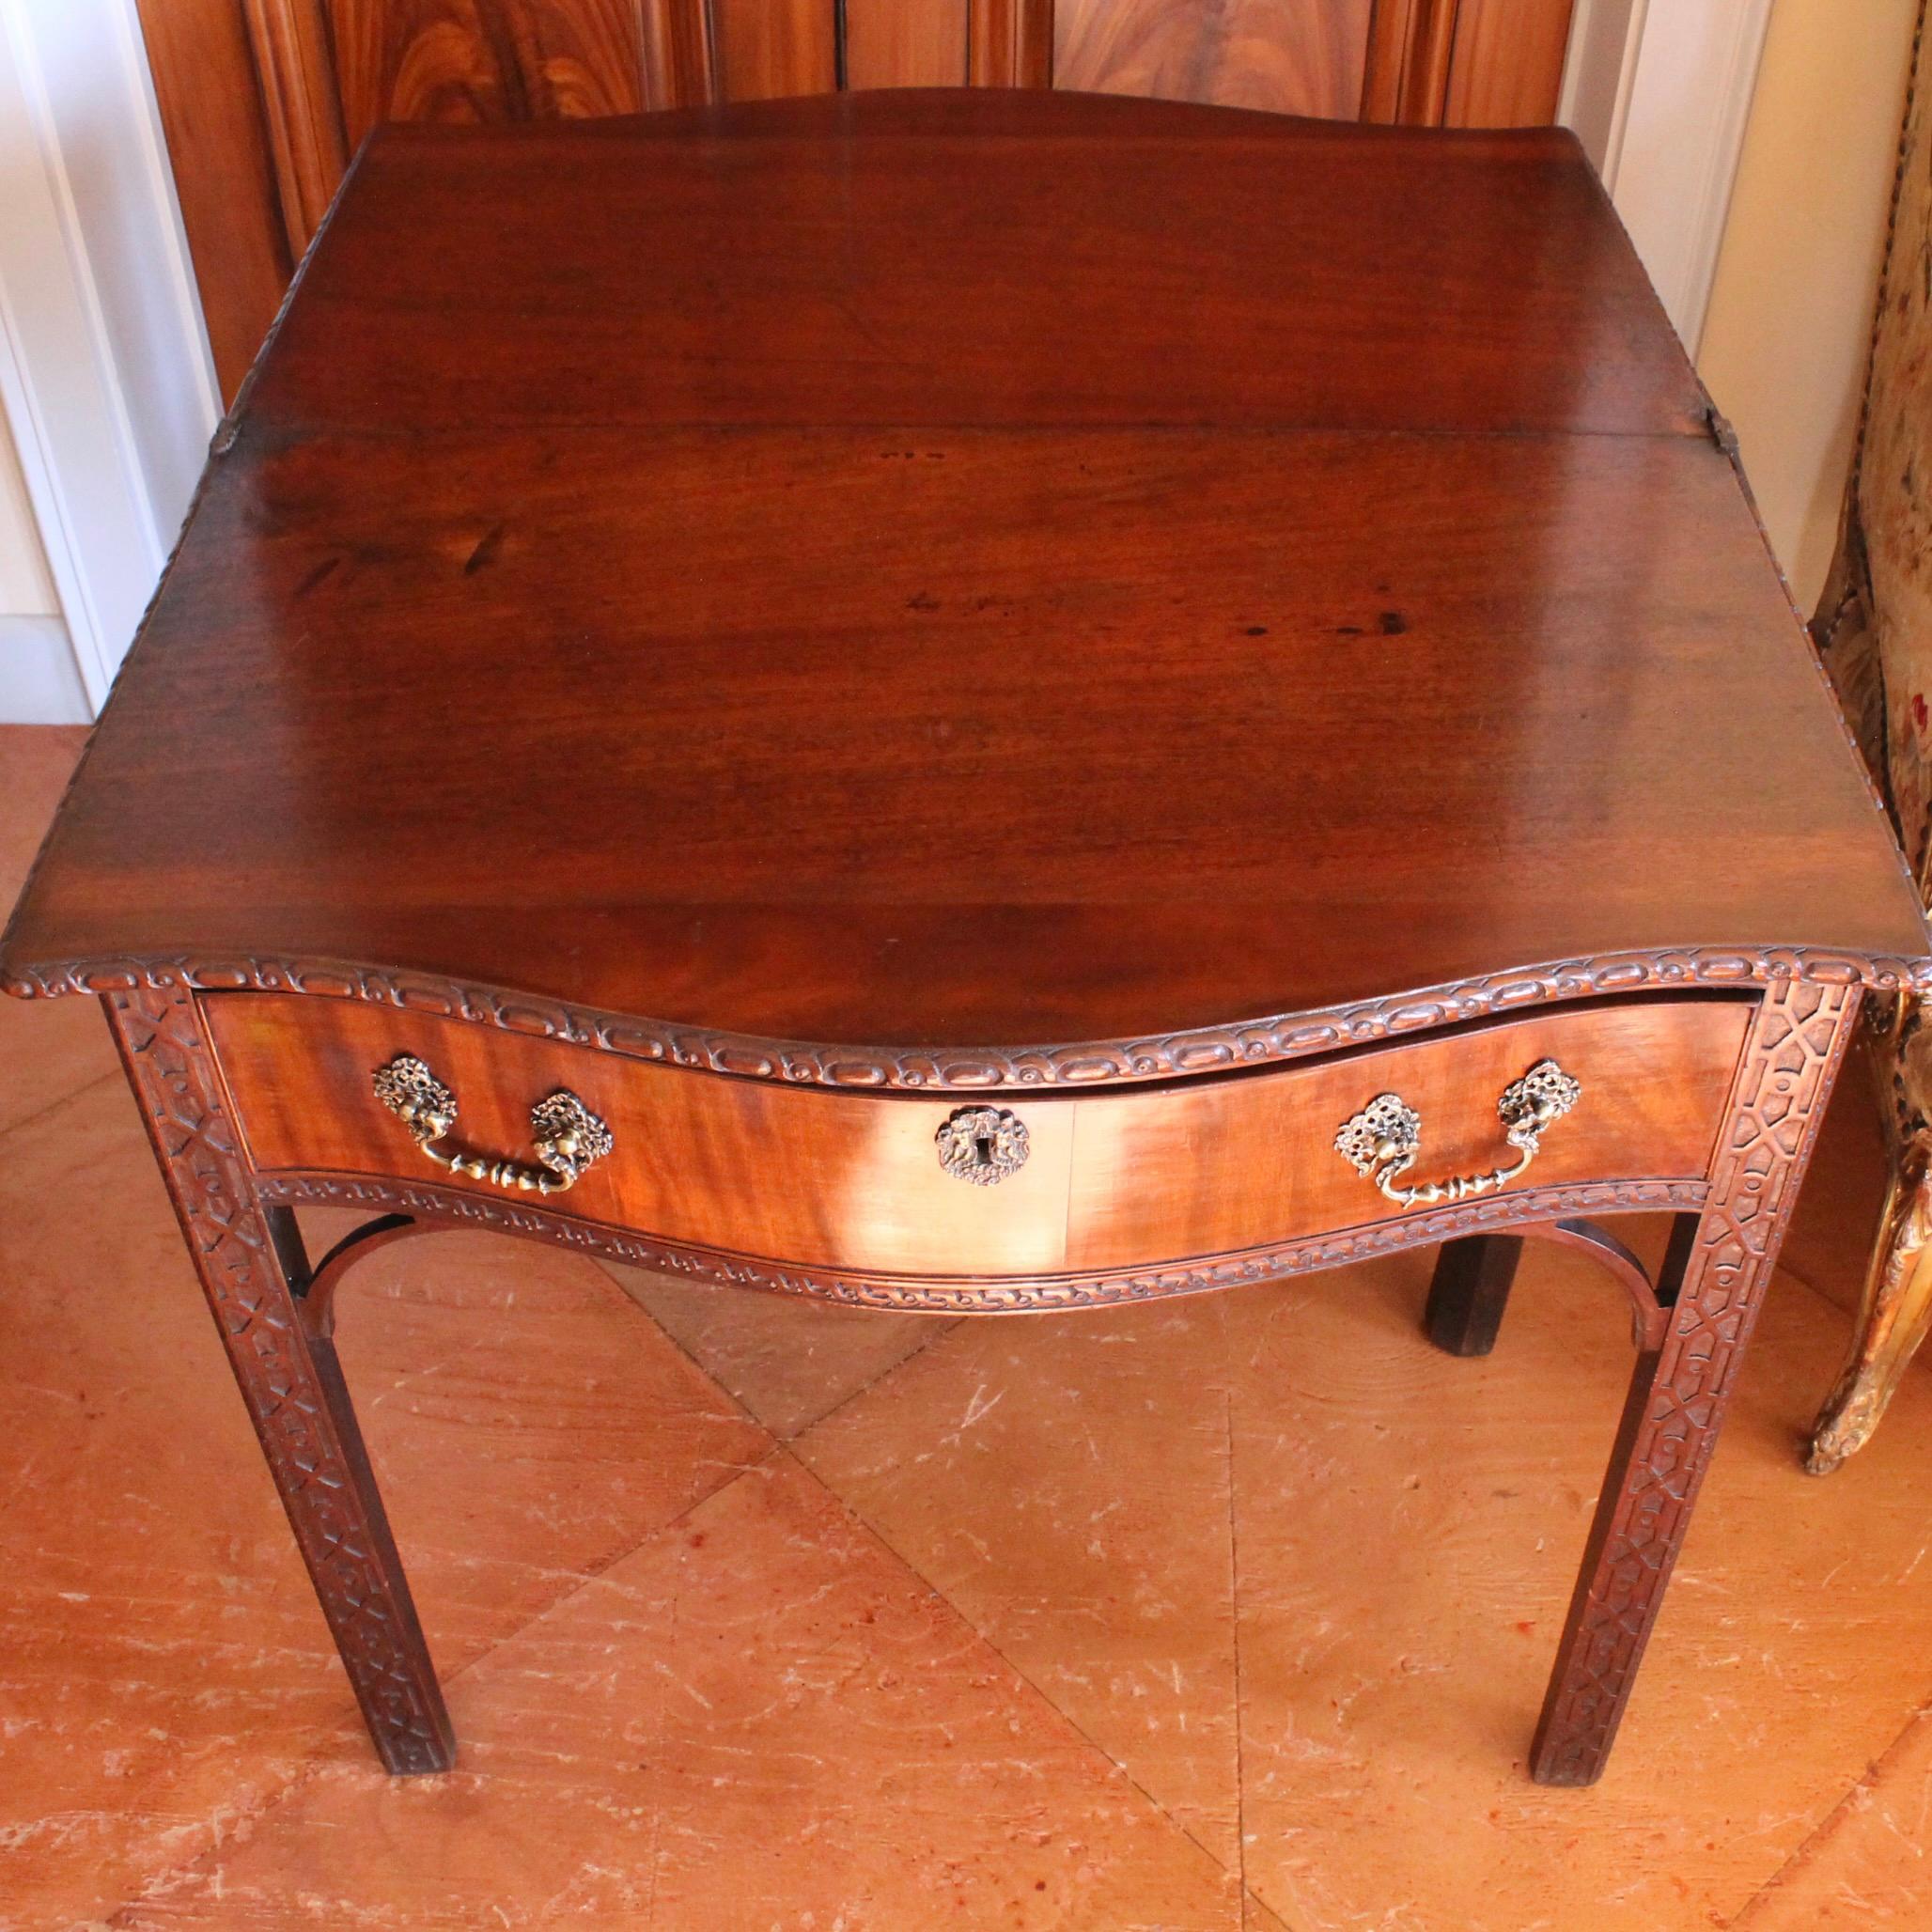 George III Serpentine Front Table With Chinese Chippendale Fret Legs, 18th c. For Sale 5